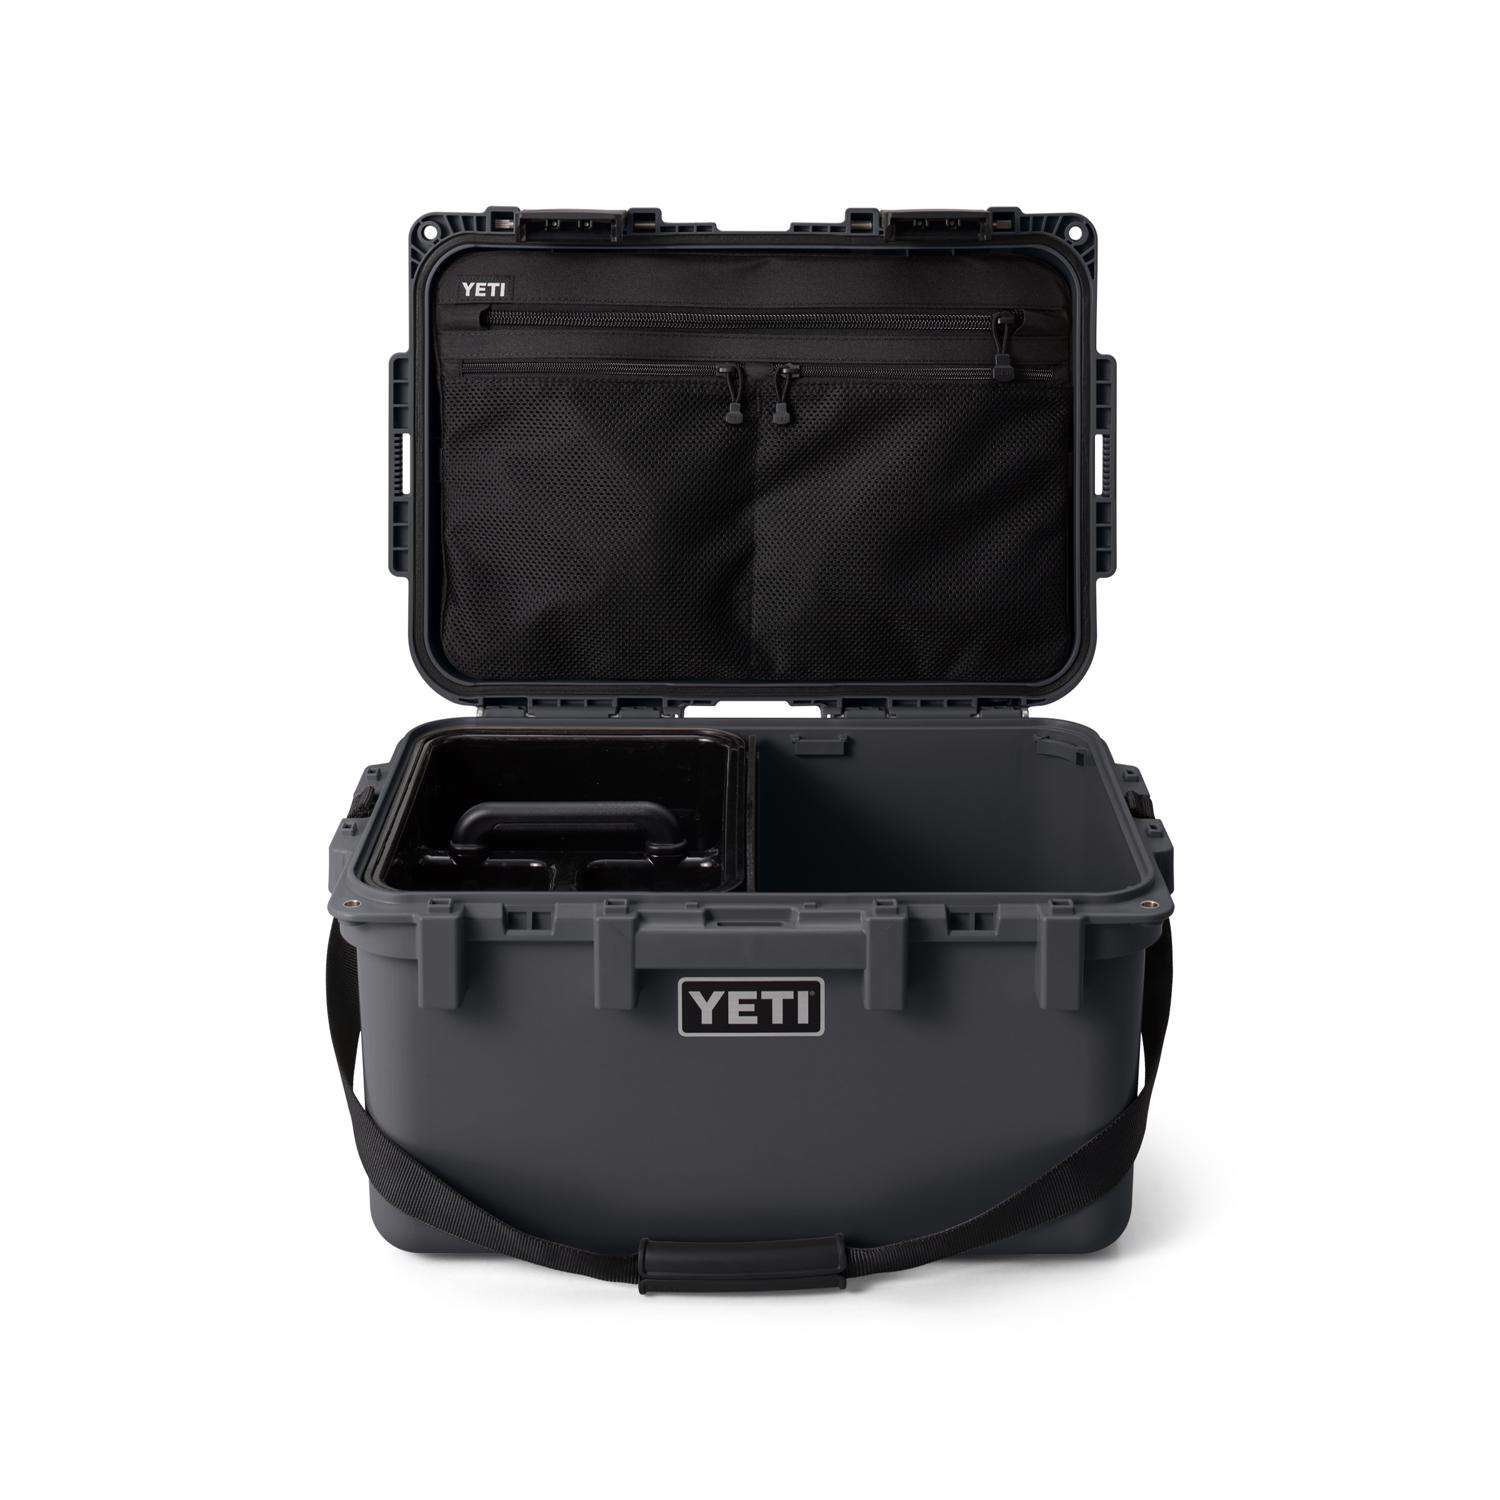 The Best From Our Tests: A Review of YETI's LoadOut GoBox